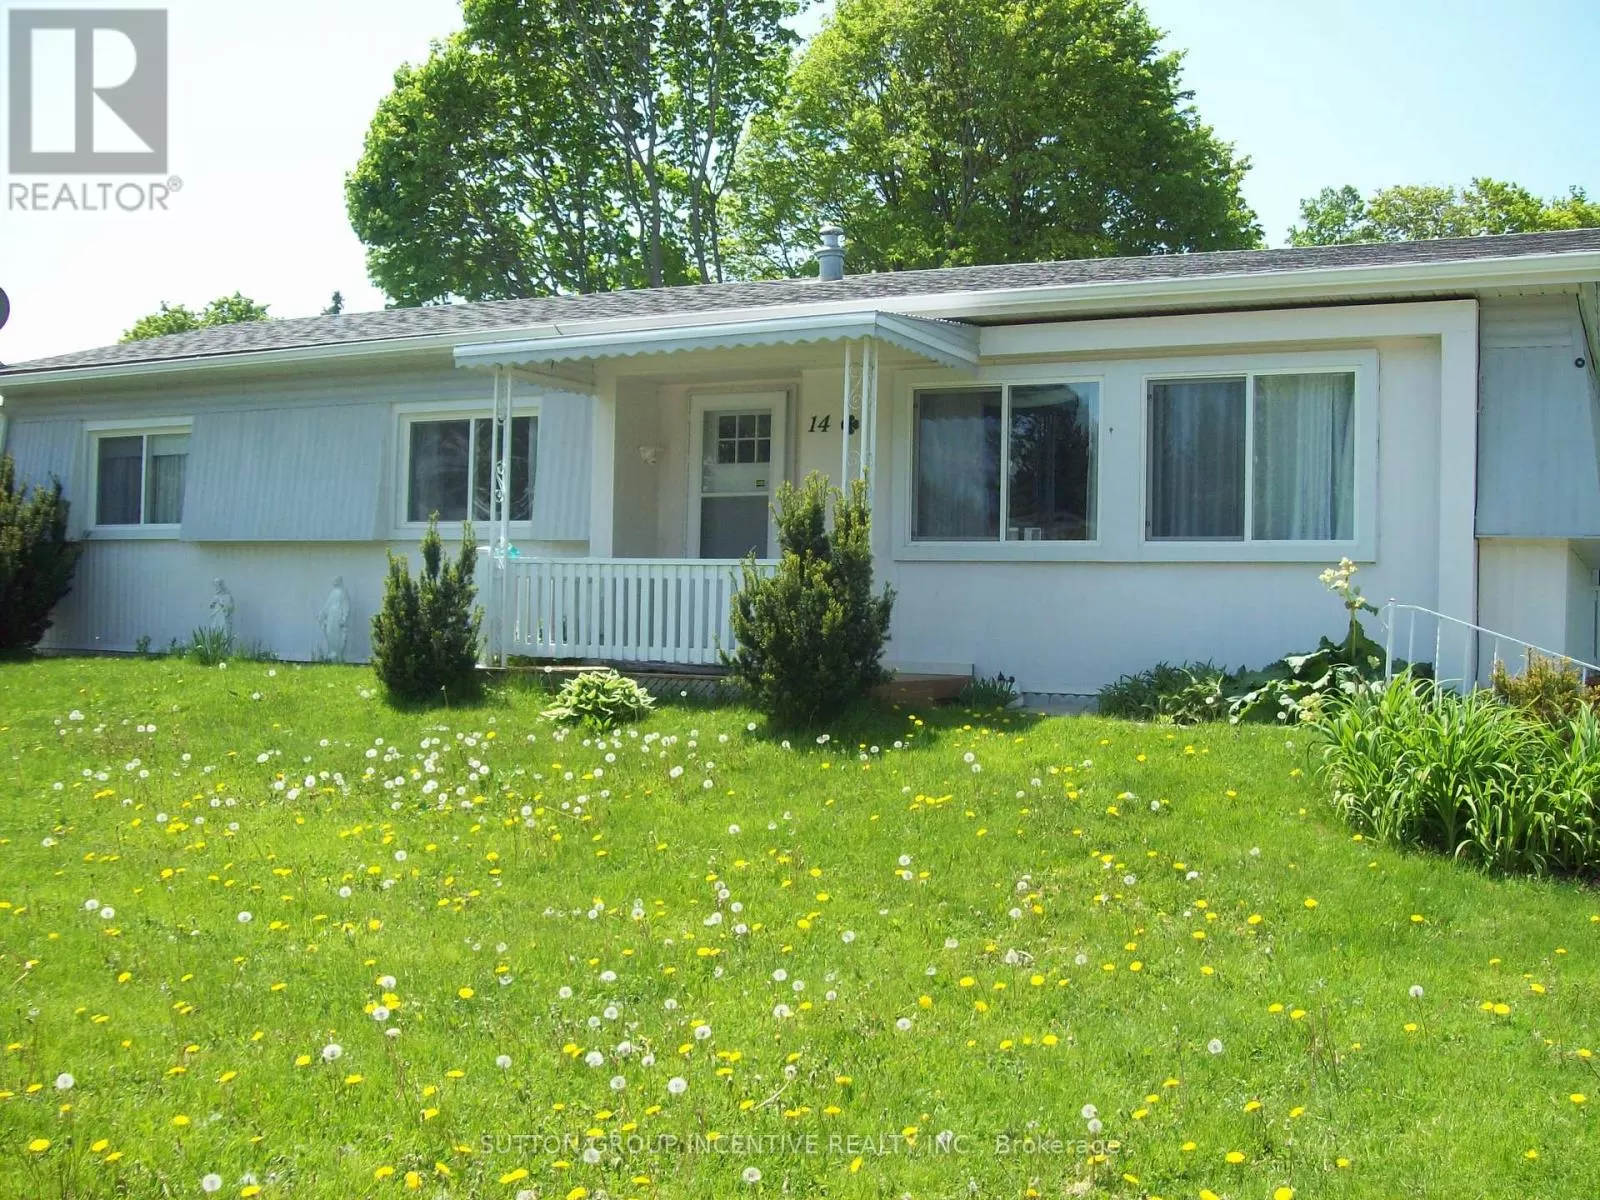 Mobile Home for rent: 14 Western Avenue, Innisfil, Ontario L9S 1N7